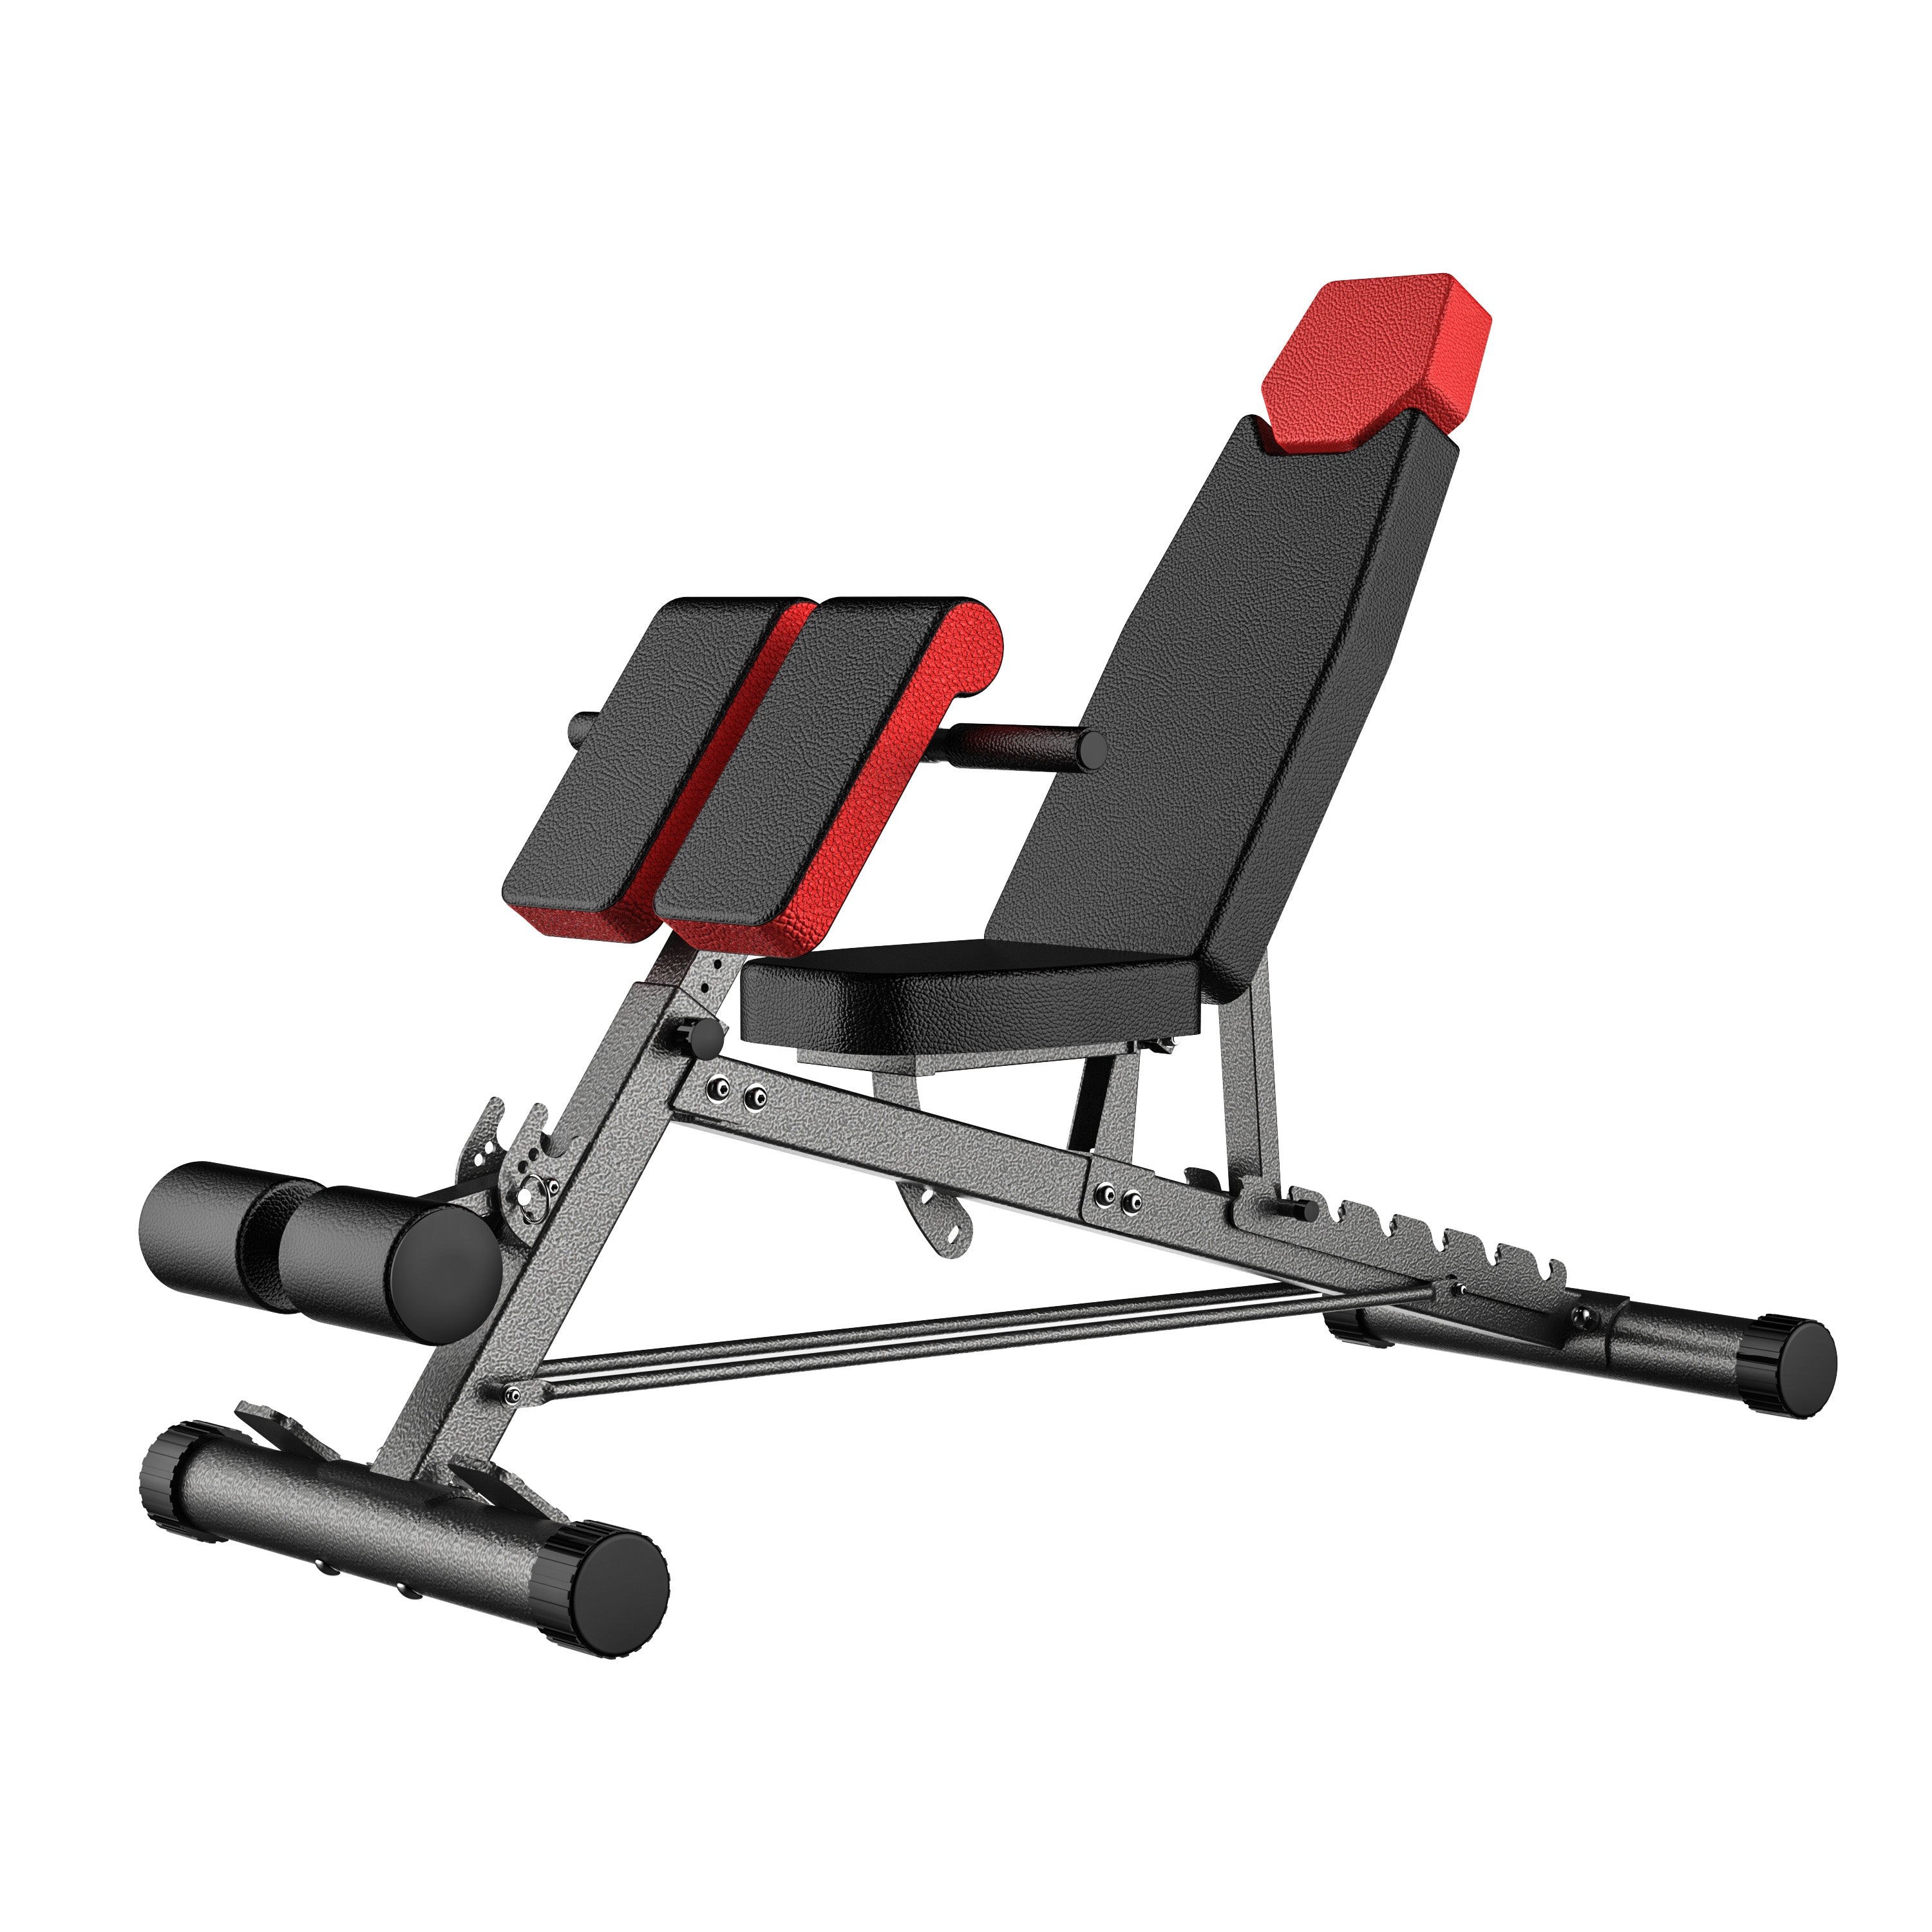 Weight Equipment and Multifunctional benches